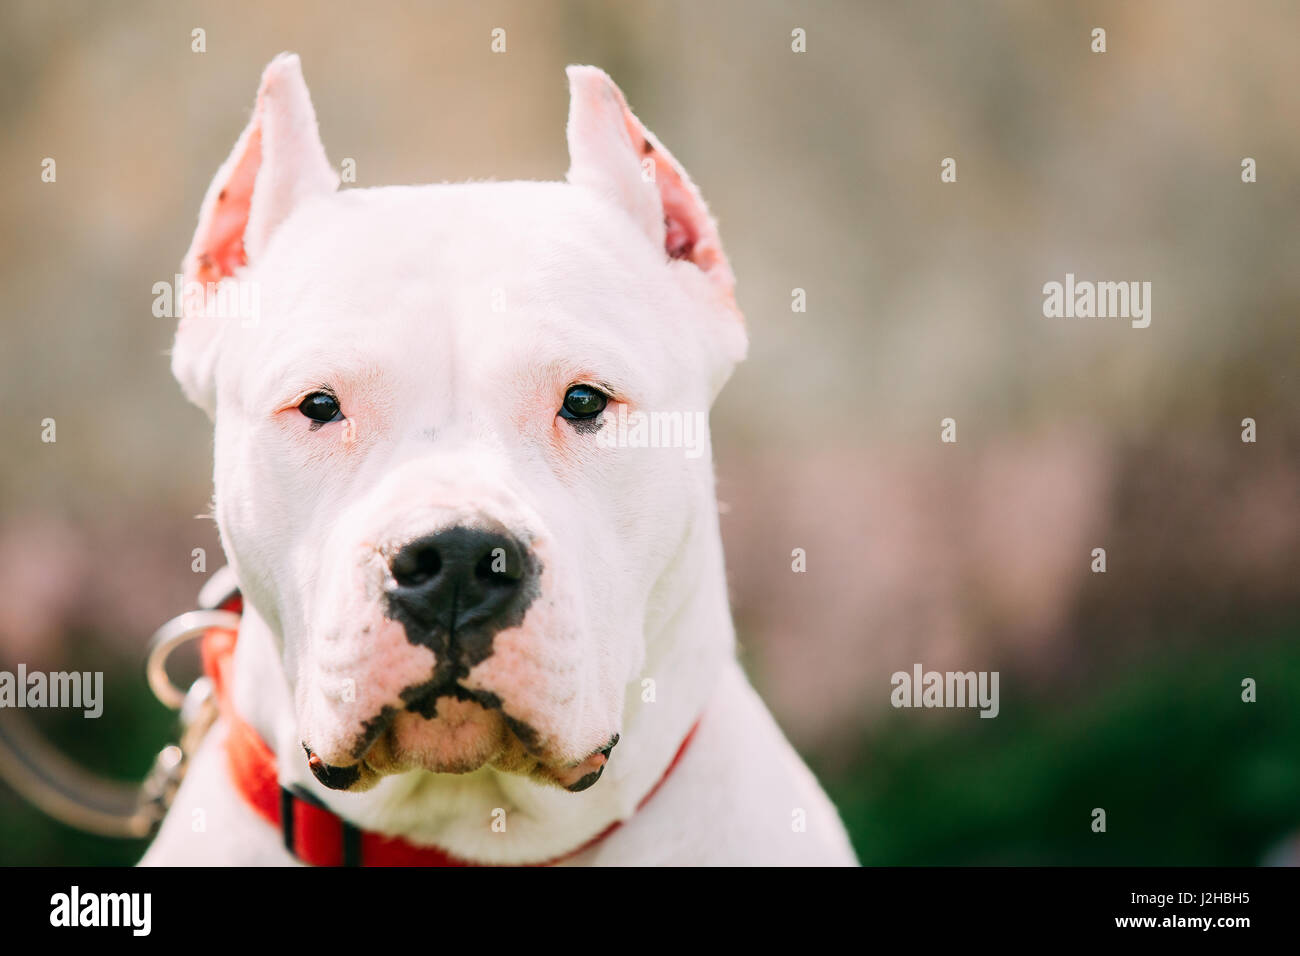 White Dog Of Dogo Argentino Also Known As The Argentine Mastiff Is A Large, White, Muscular Dog That Was Developed In Argentina Primarily For Purpose  Stock Photo